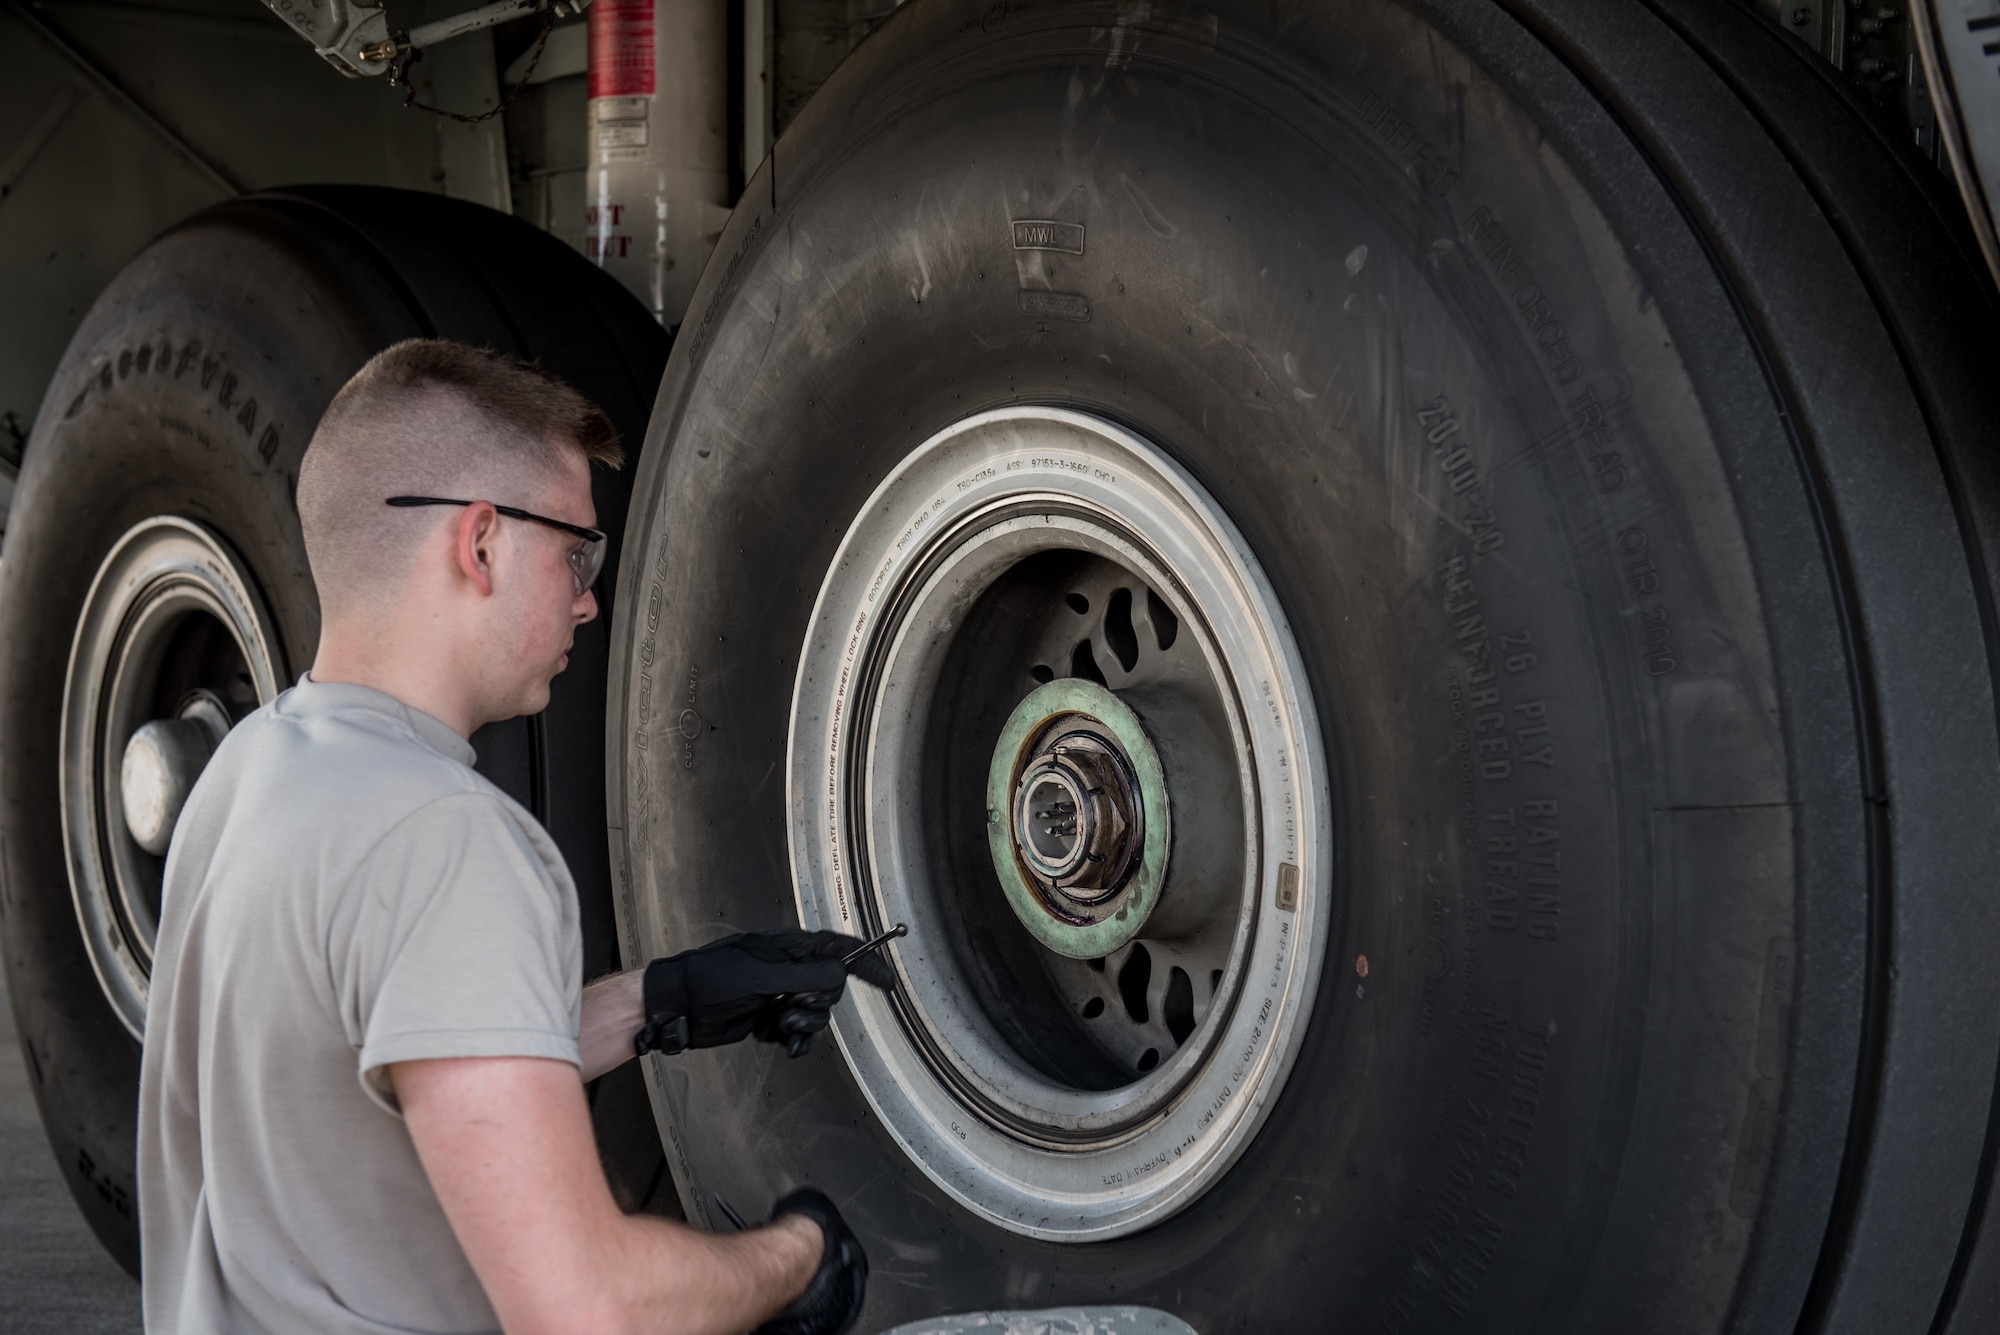 Airman 1st Class Matthew Dunlap, a crew chief in the Kentucky Air National Guard’s 123rd Airlift Wing, prepares for a class on how to change tires on C-130 Hercules aircraft at Maintenance University in Savannah, Ga., May 18, 2019. The four-day intensive training event was held at the Combat Readiness Training Center from May 19 to 22.